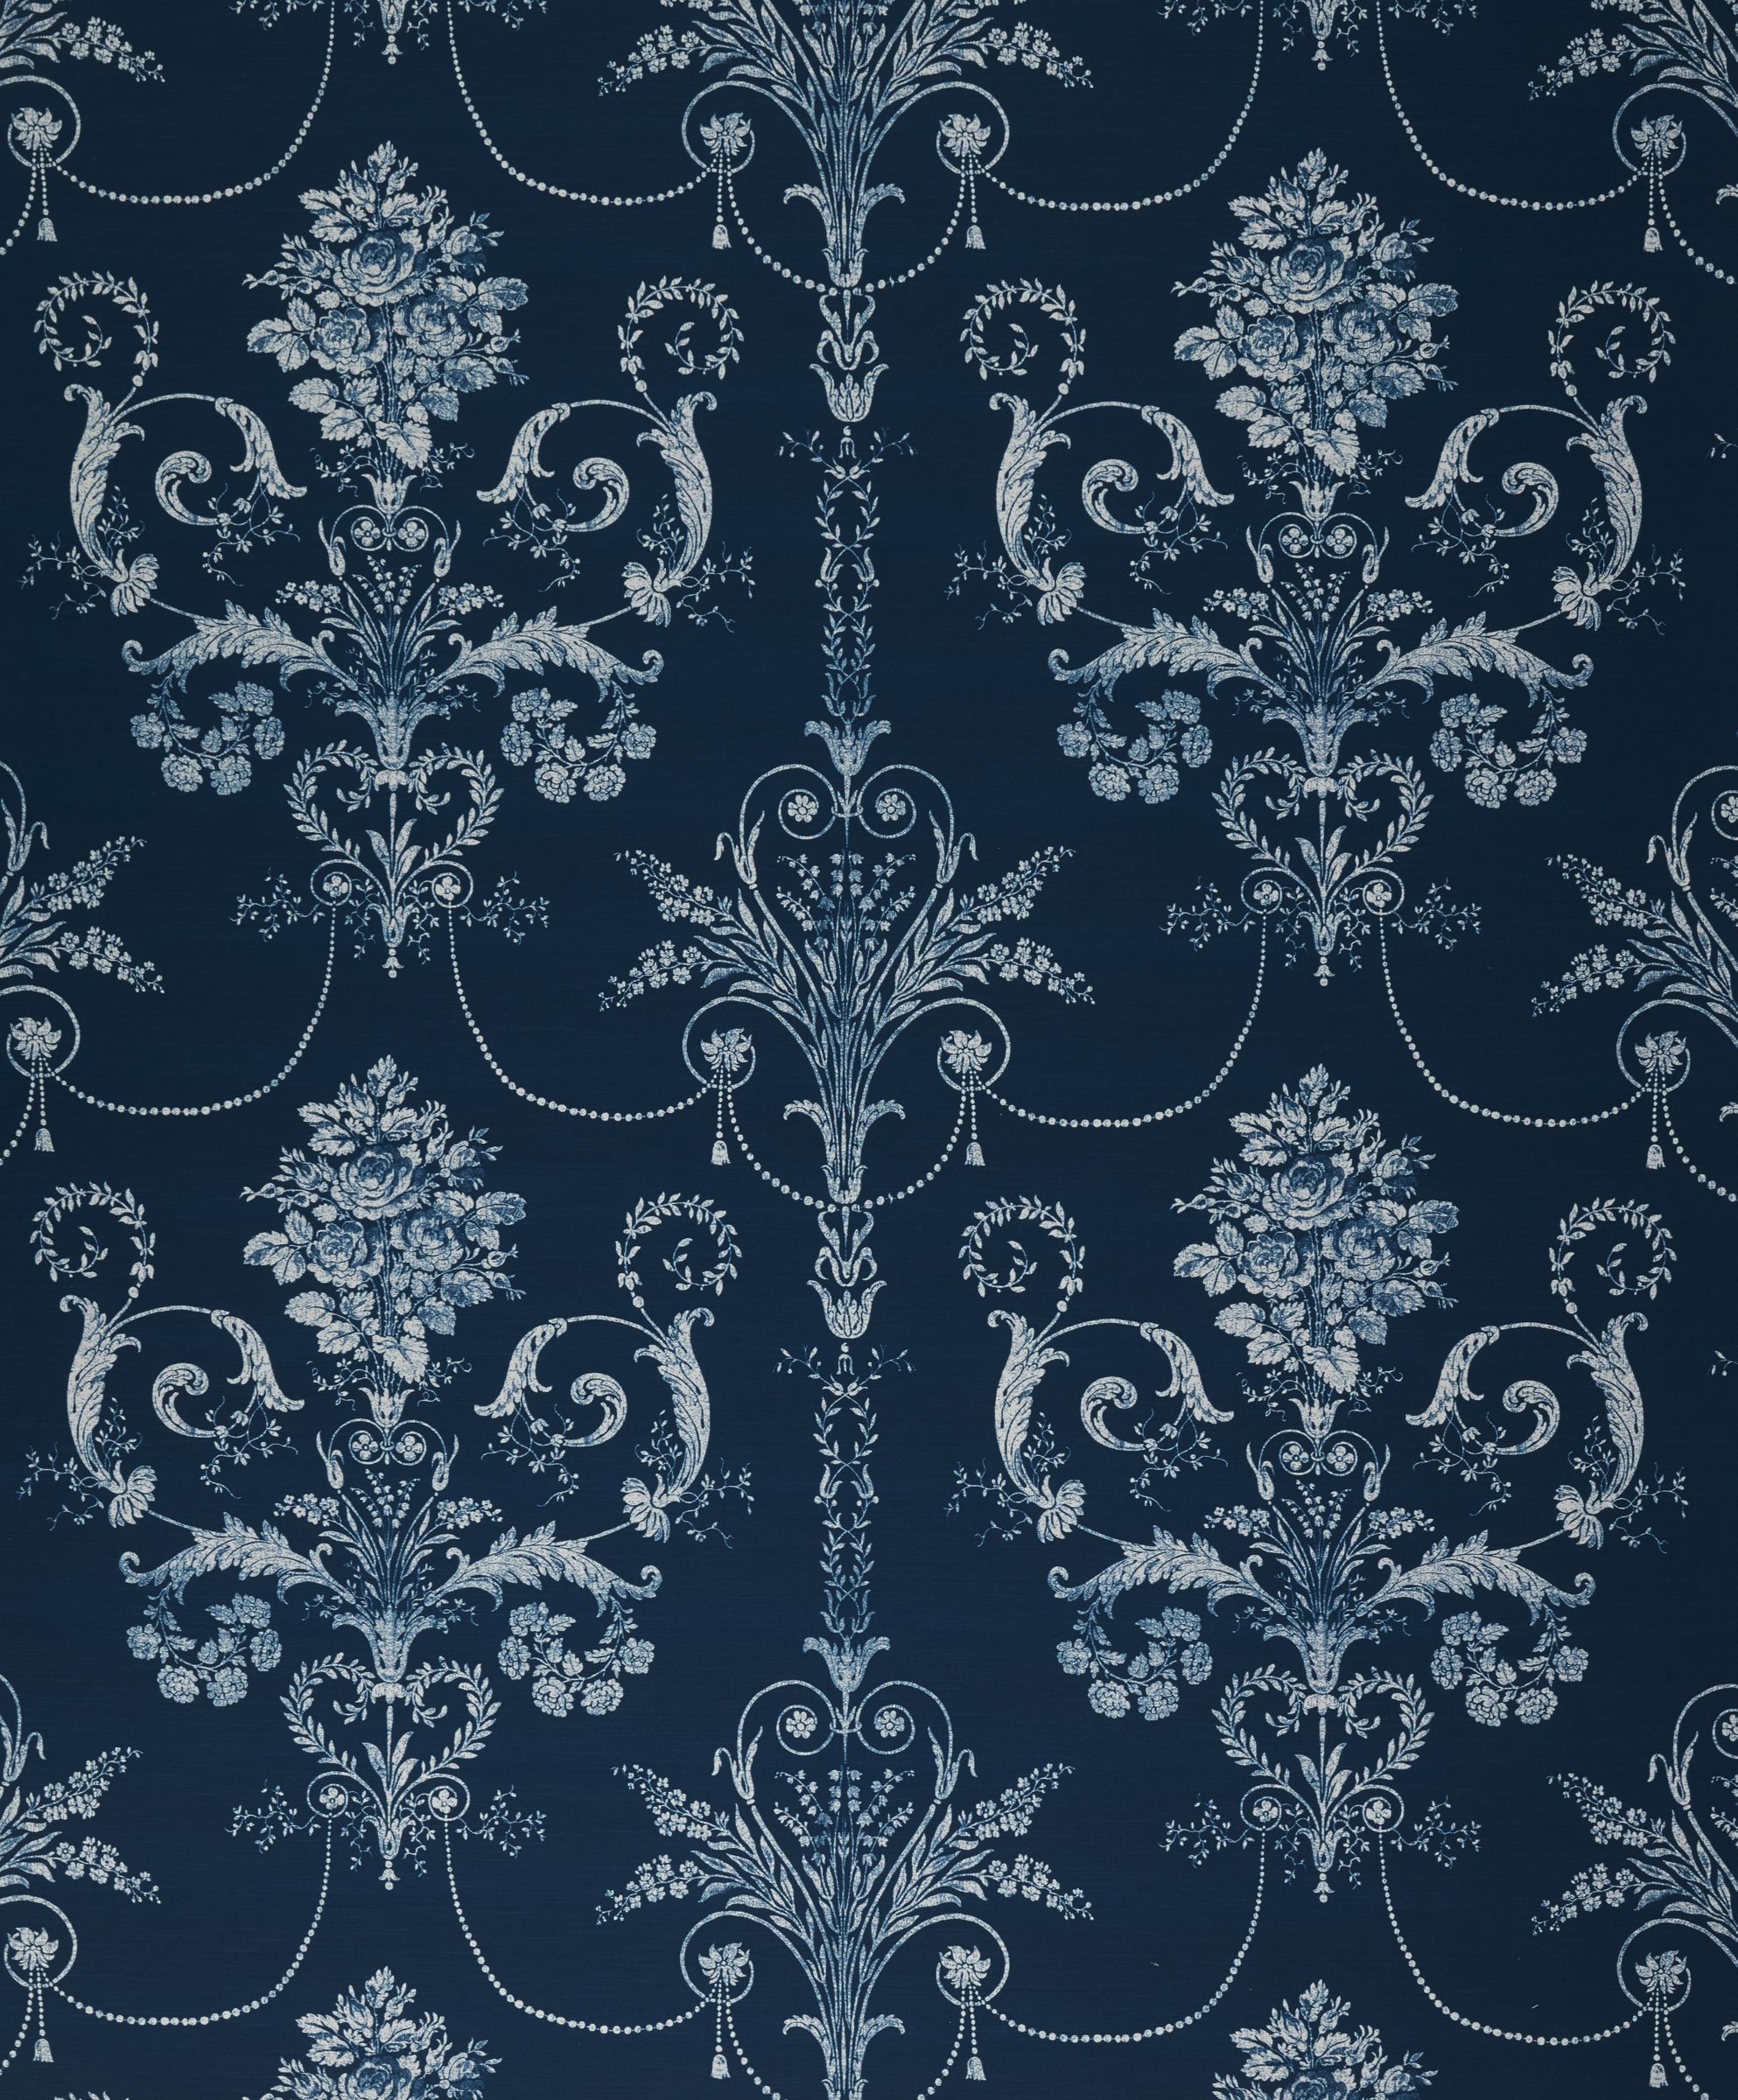 Laura Ashley Josette Made to Measure Curtains, Midnight